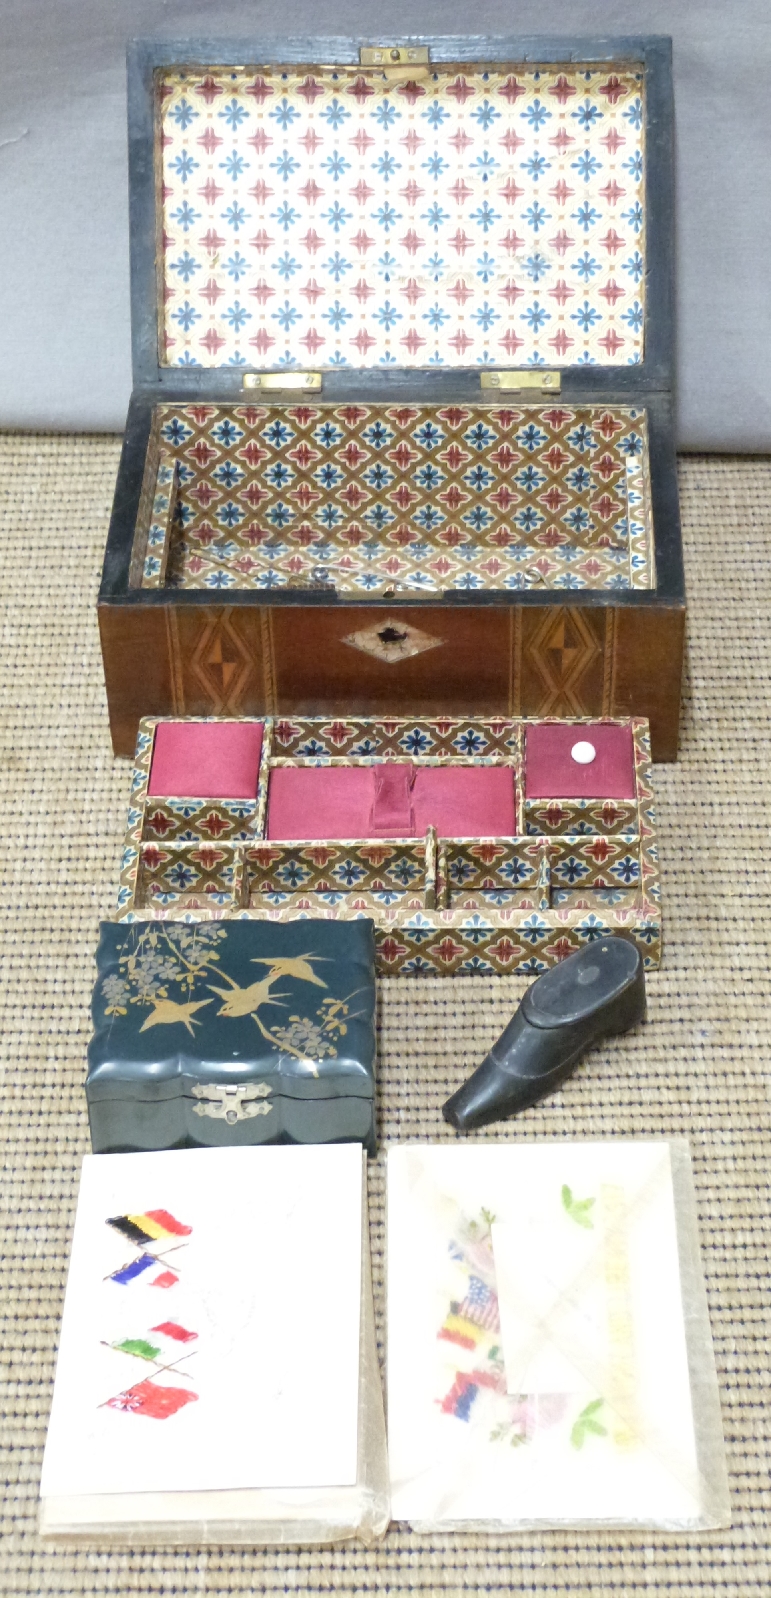 An inlaid box, Japanese box and snuff boxes